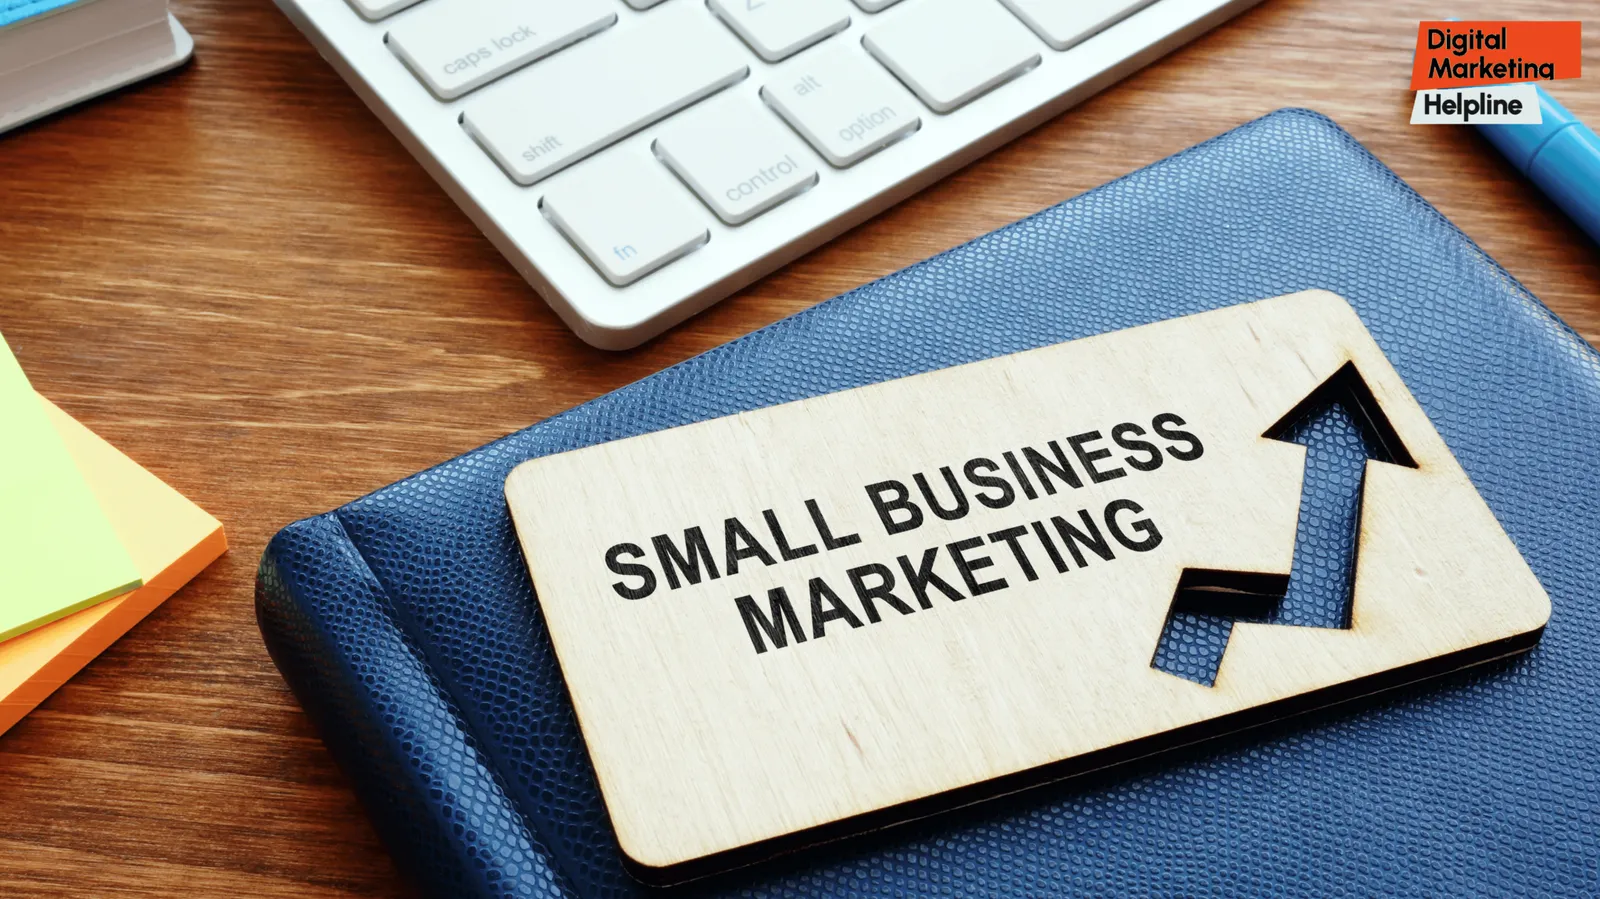 Marketing Automation for Small Businesses in digital marketing